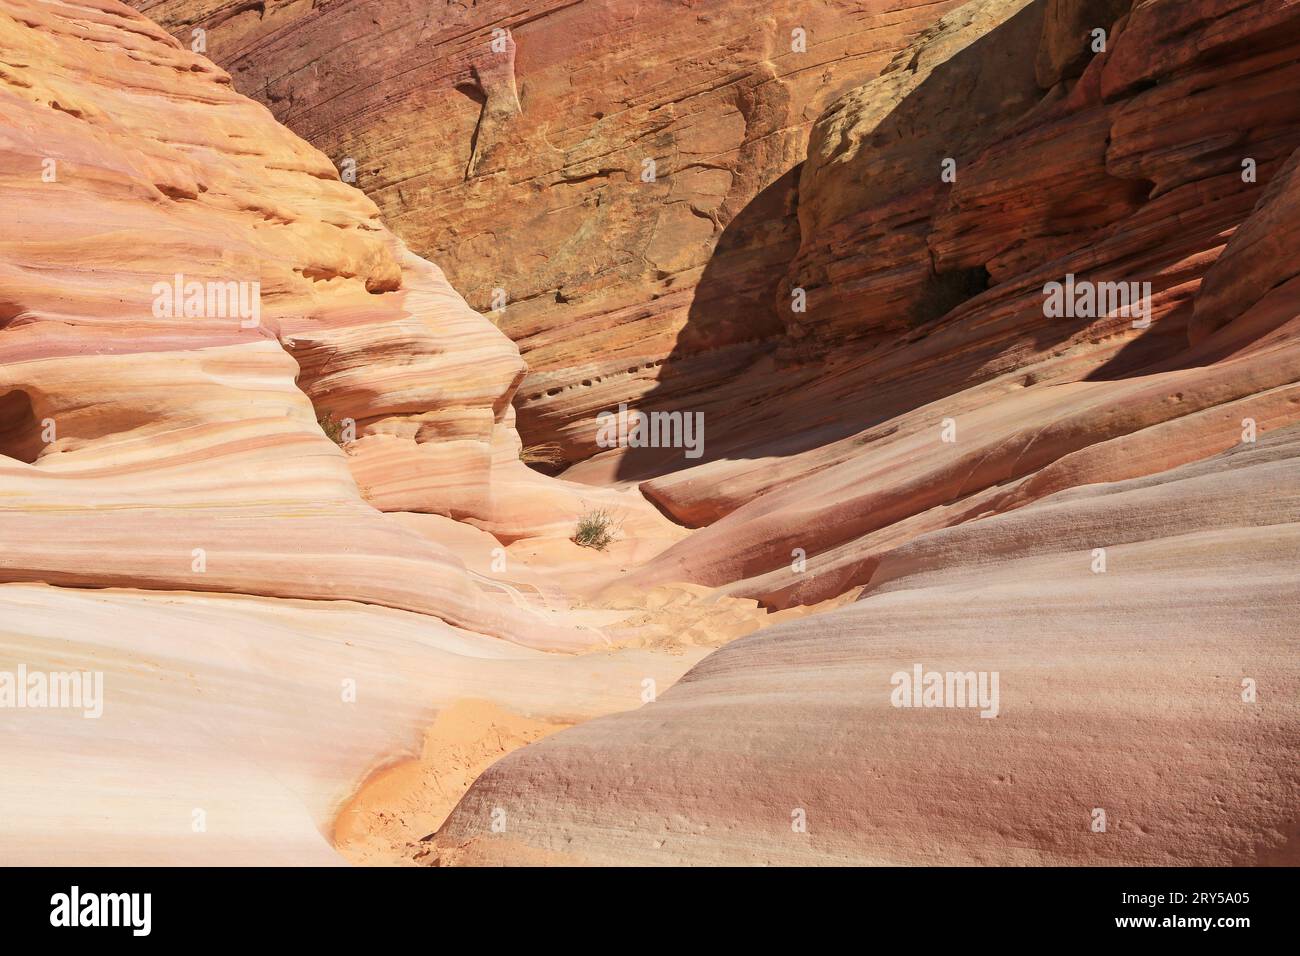 Pink Canyon - Valley of Fire State Park, Nevada Stockfoto